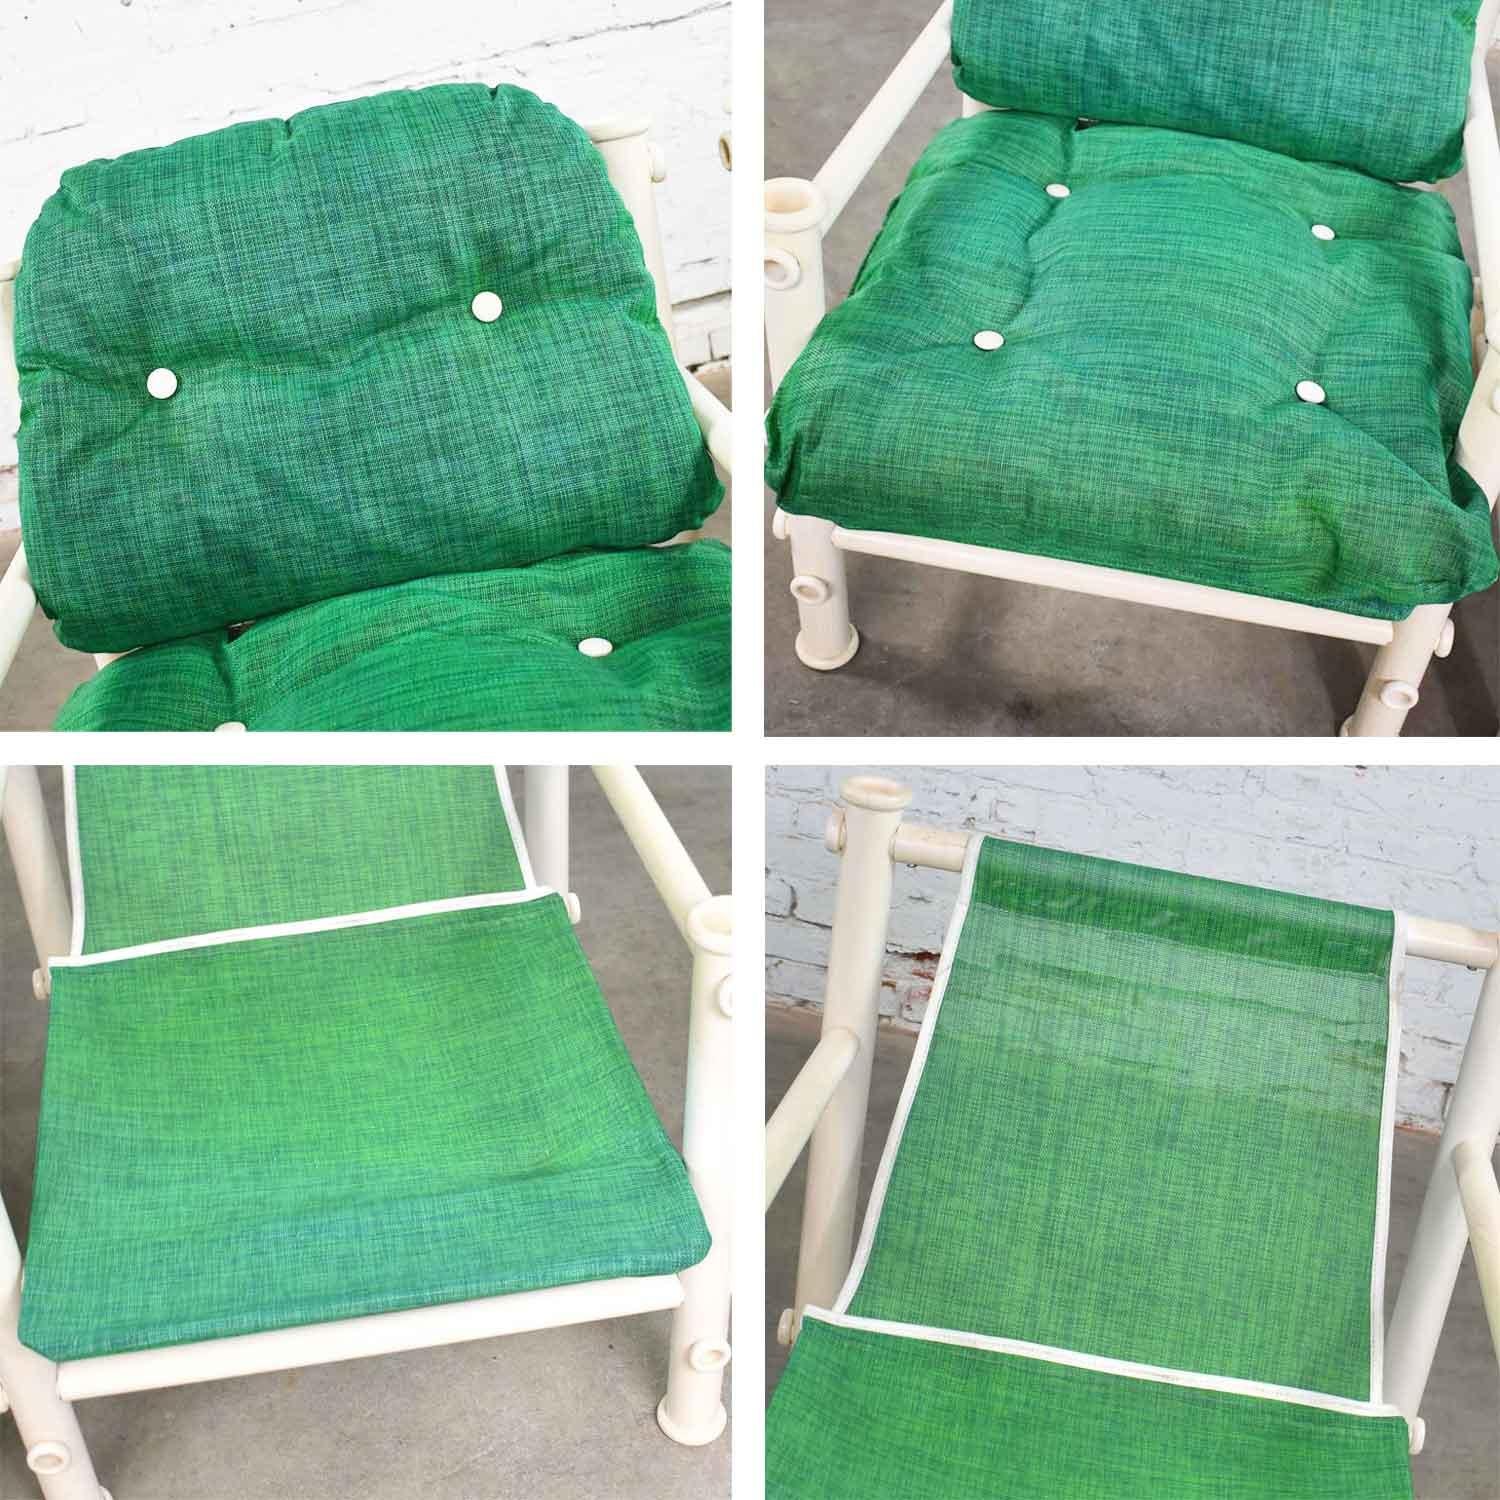 2 Jerry Johnson Landes PVC Outdoor Idyllwild Lounge Chairs Green Mesh Upholstery For Sale 1